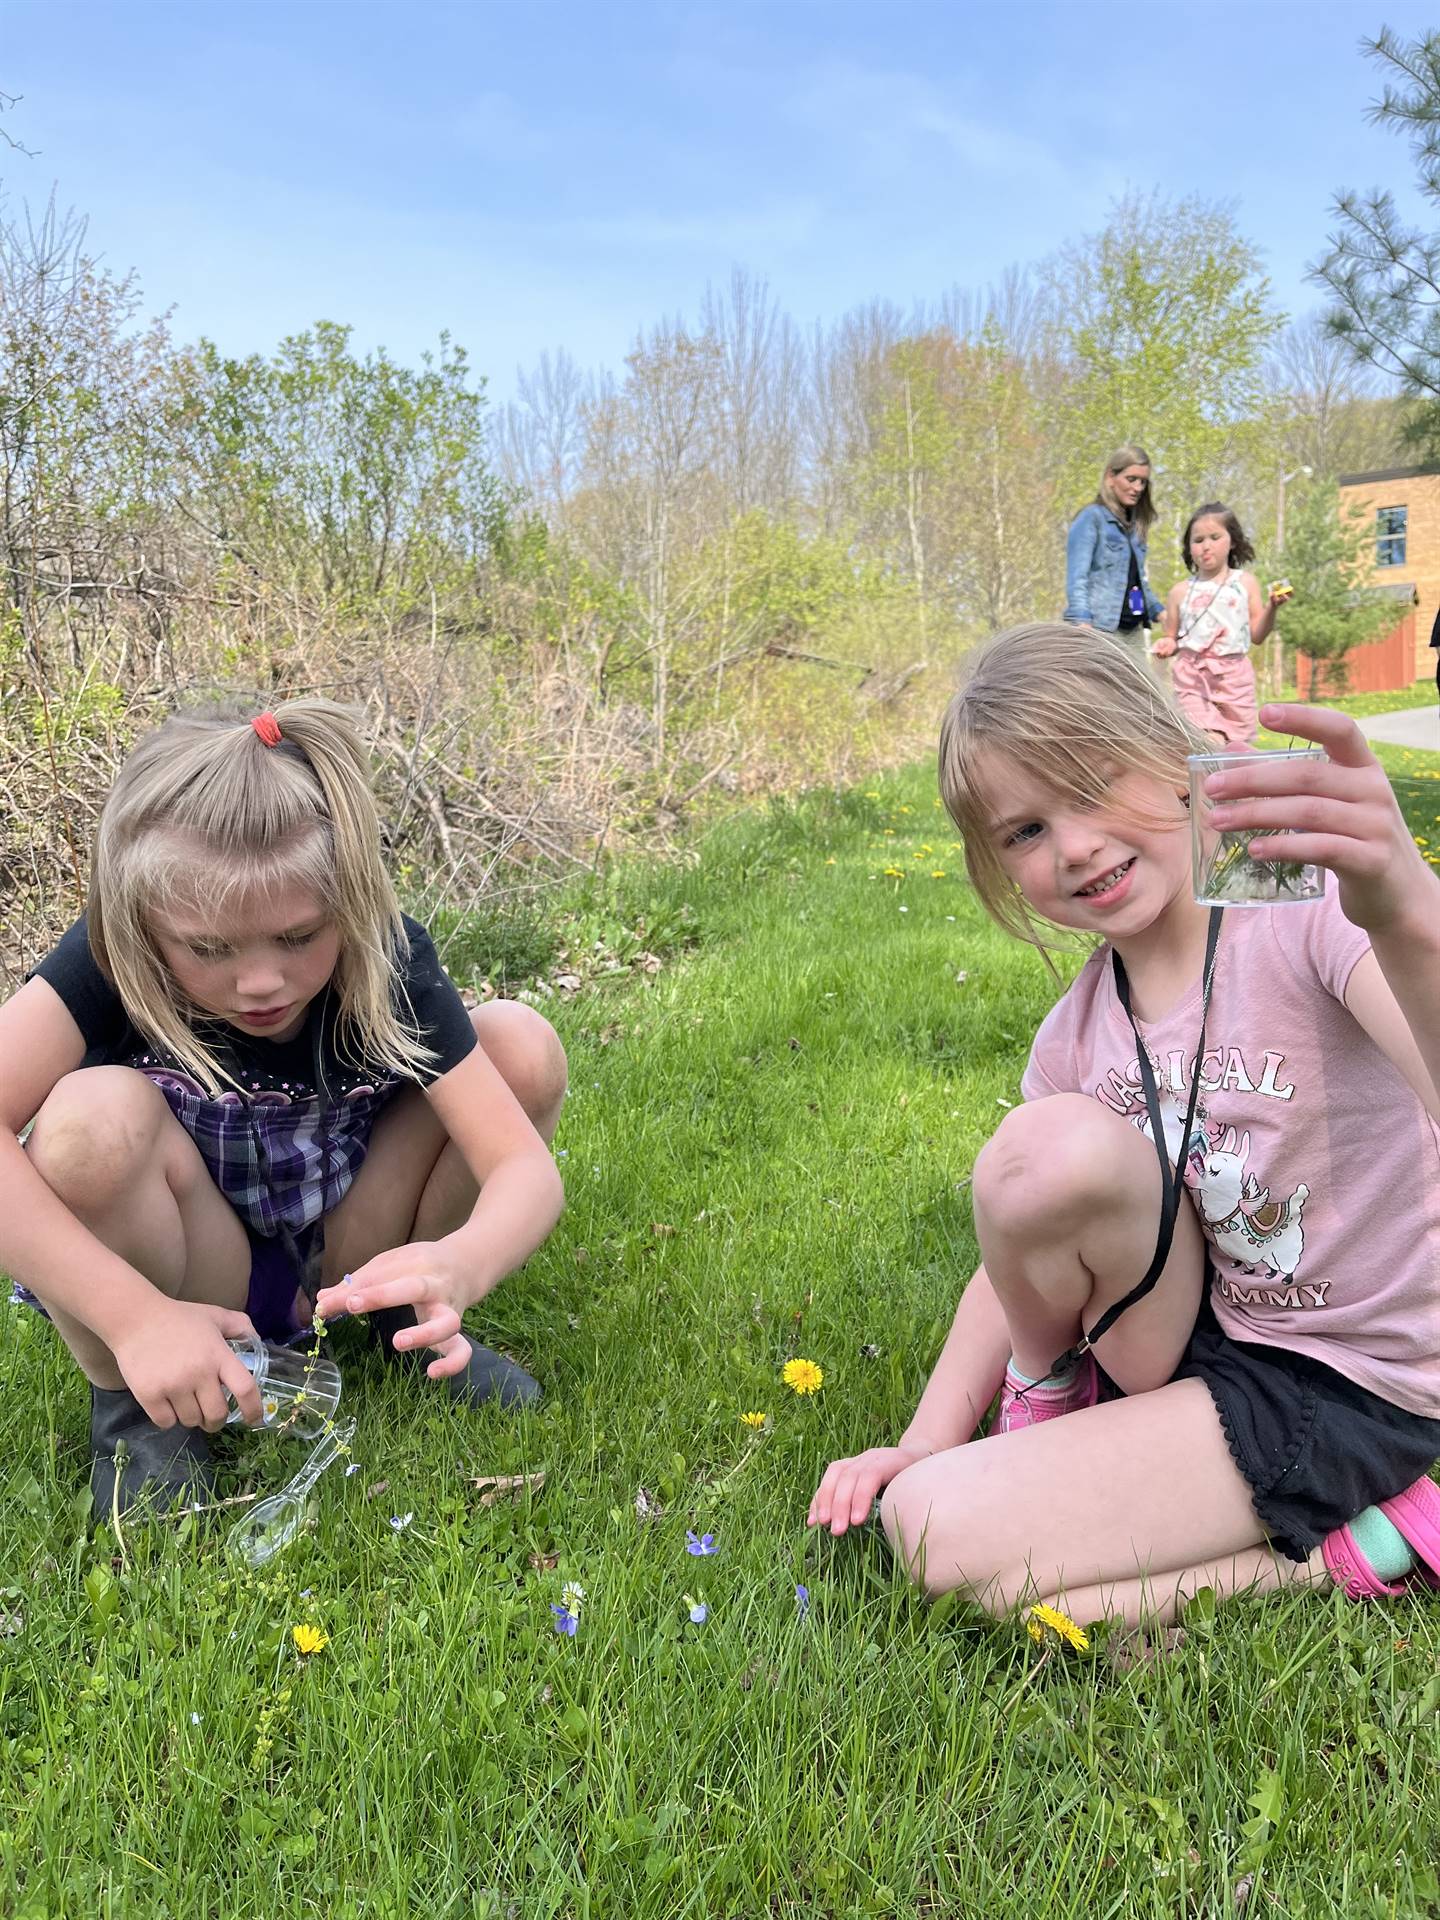 students outside on grass picking flowers